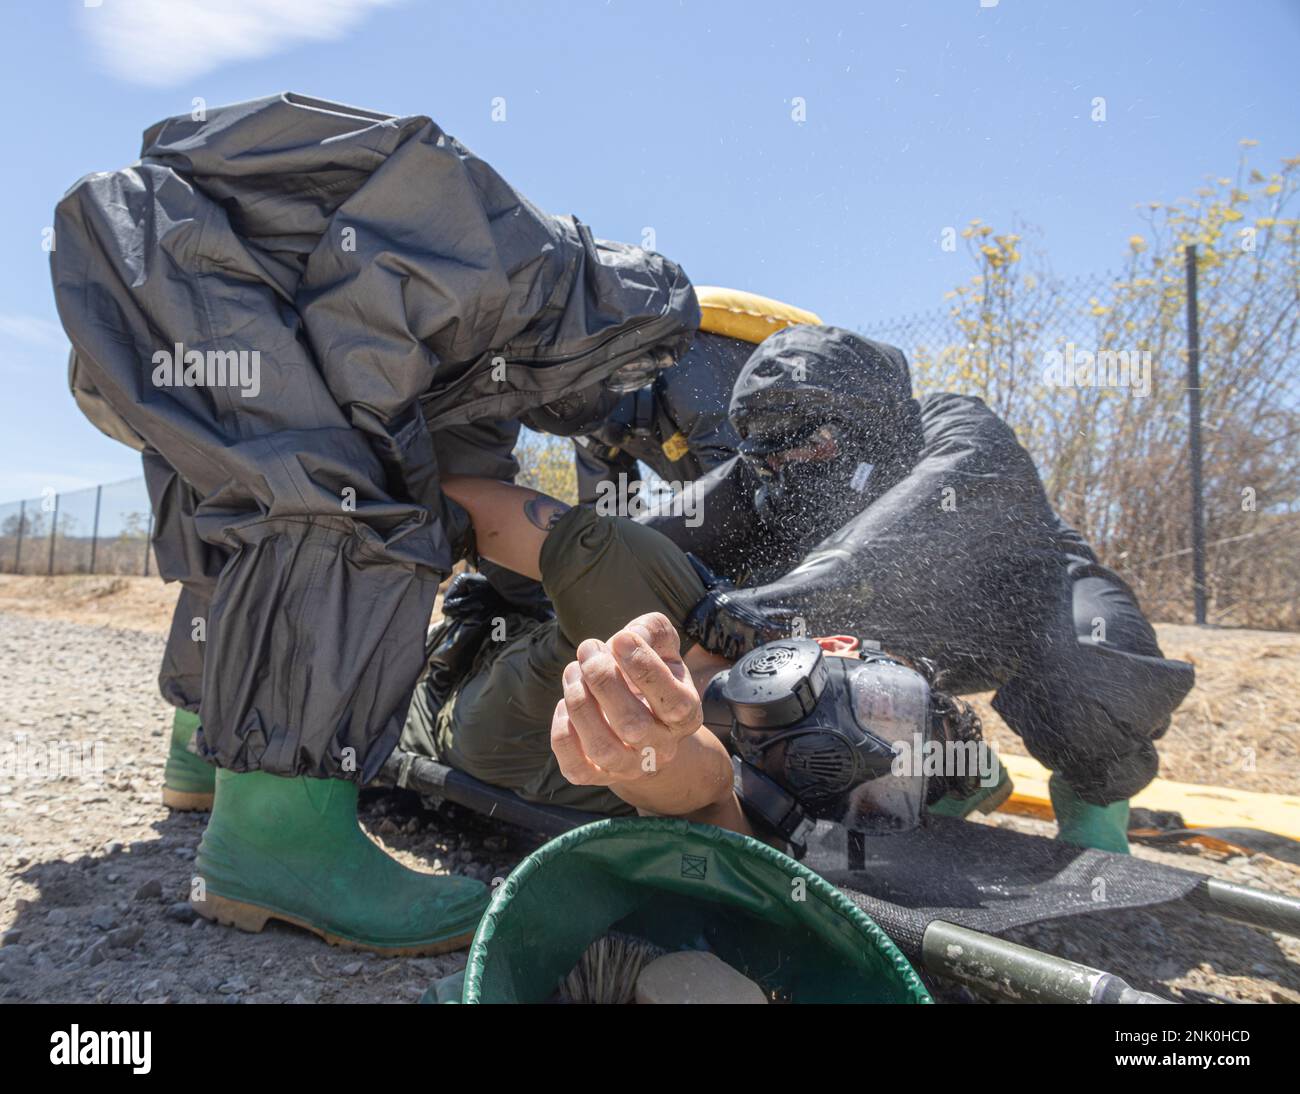 U.S. Marines assigned to 1st Marine Division conduct a wash down as part of the simulated decontamination process during scenario-based training on Camp Pendleton, California, Aug. 9, 2022. CBRN is responsible for conducting training and reconnaissance, chemical detection identification, biological agent collection and sampling, decontamination of personnel, equipment, and casualties and individual protective measures in first aid for unit personnel. Stock Photo